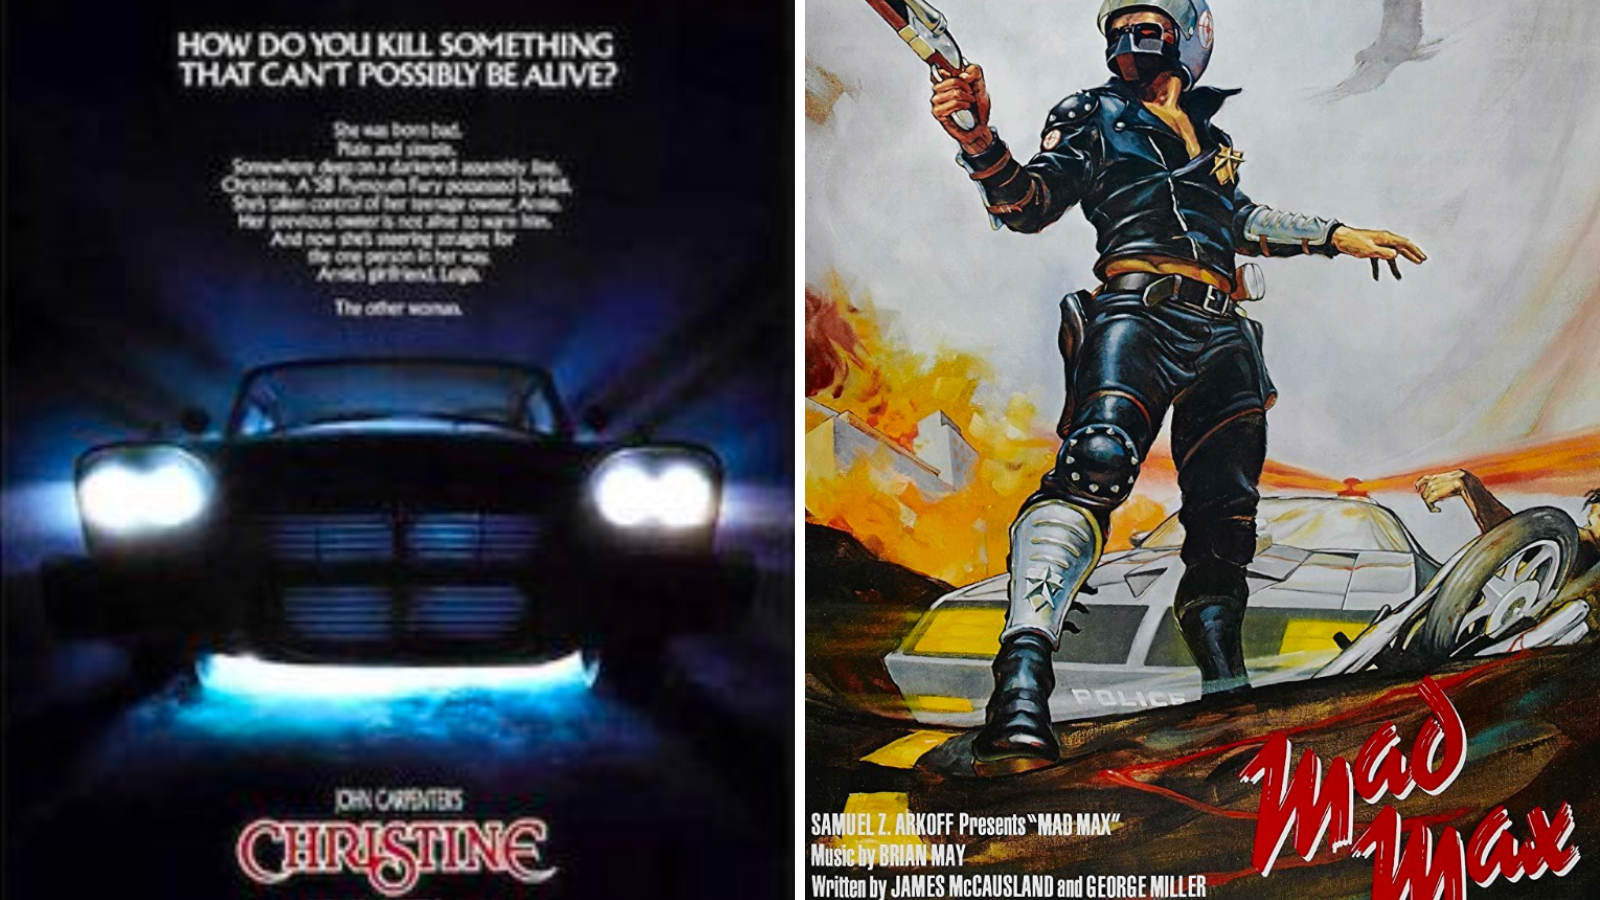 Christine and Mad Max posters